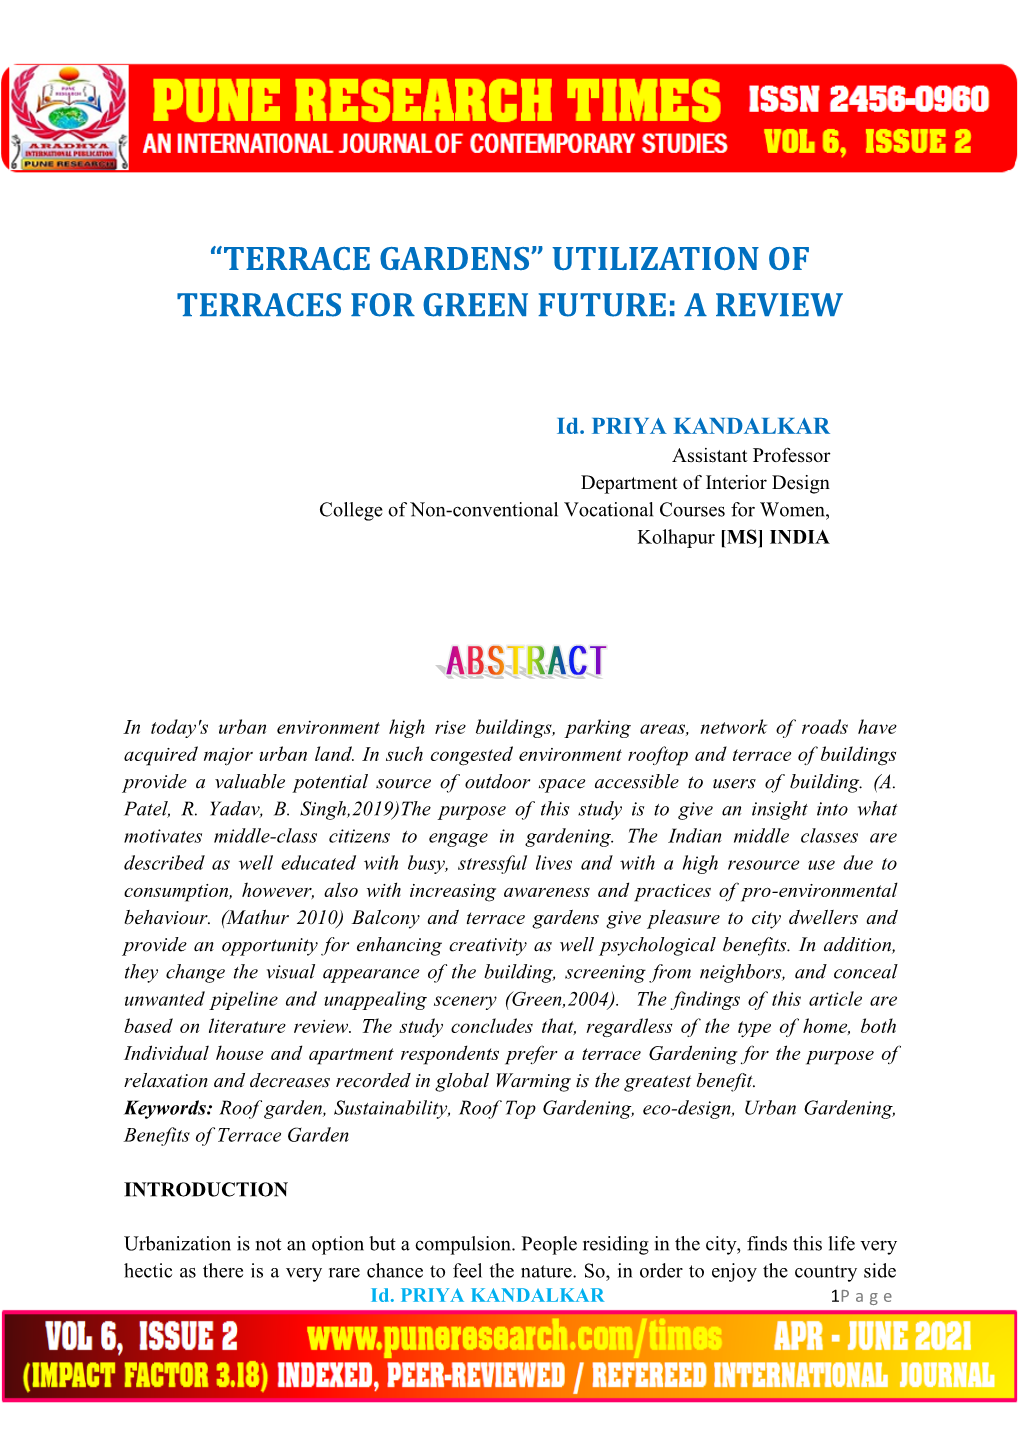 “Terrace Gardens” Utilization of Terraces for Green Future: a Review